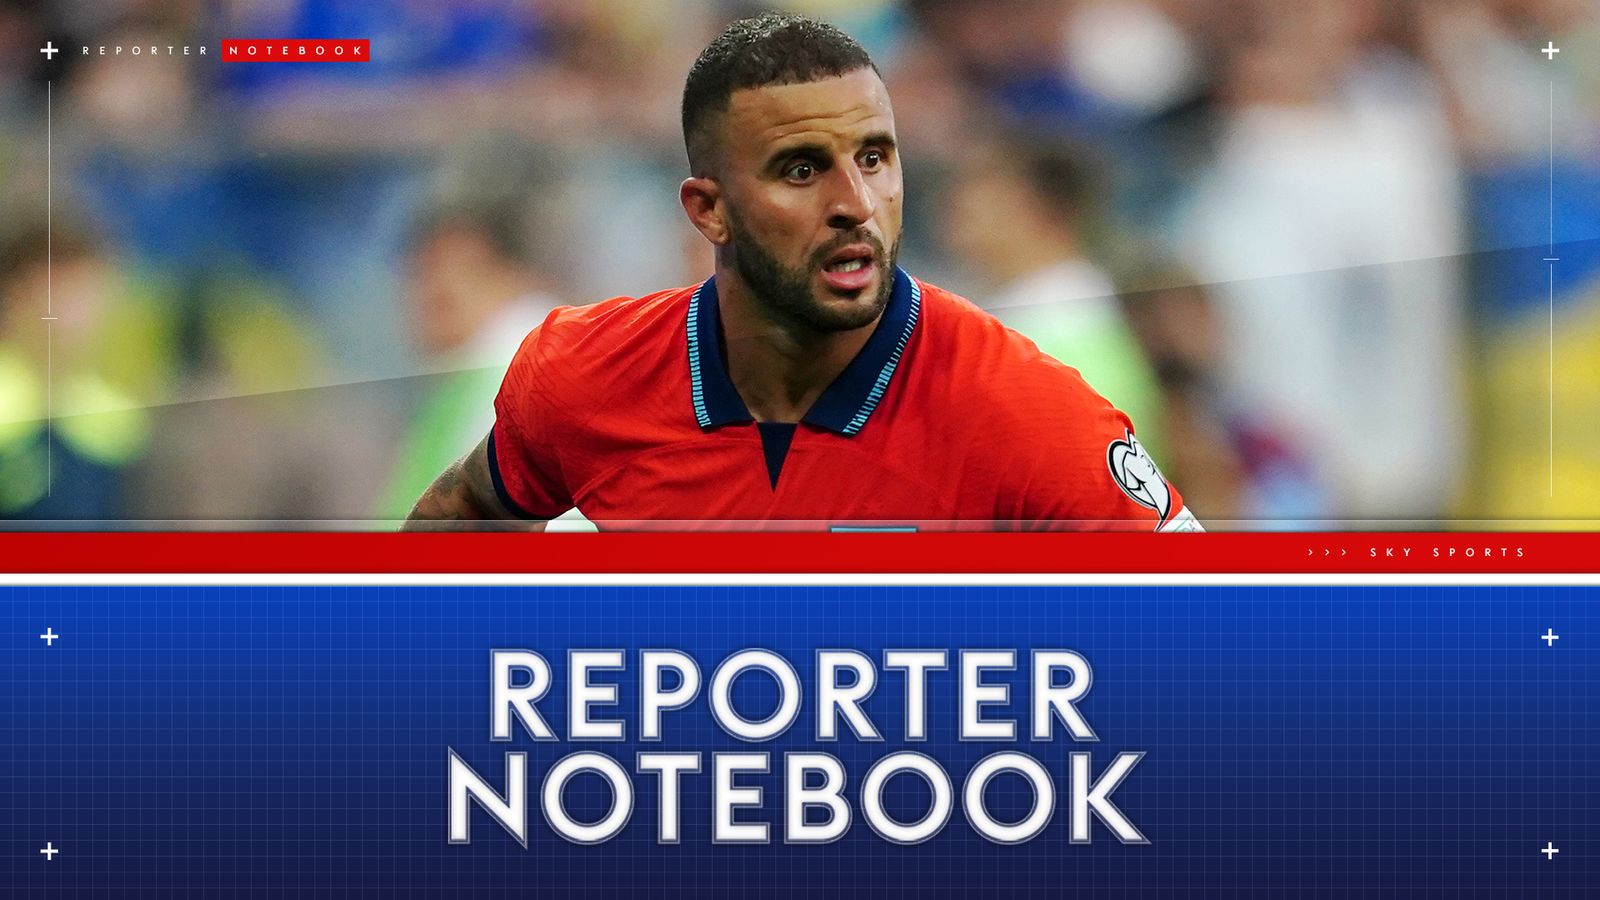 reporter-notebook-kyle-walker-strengthens-case-as-greatest-england-right-back-in-draw-against-ukraine